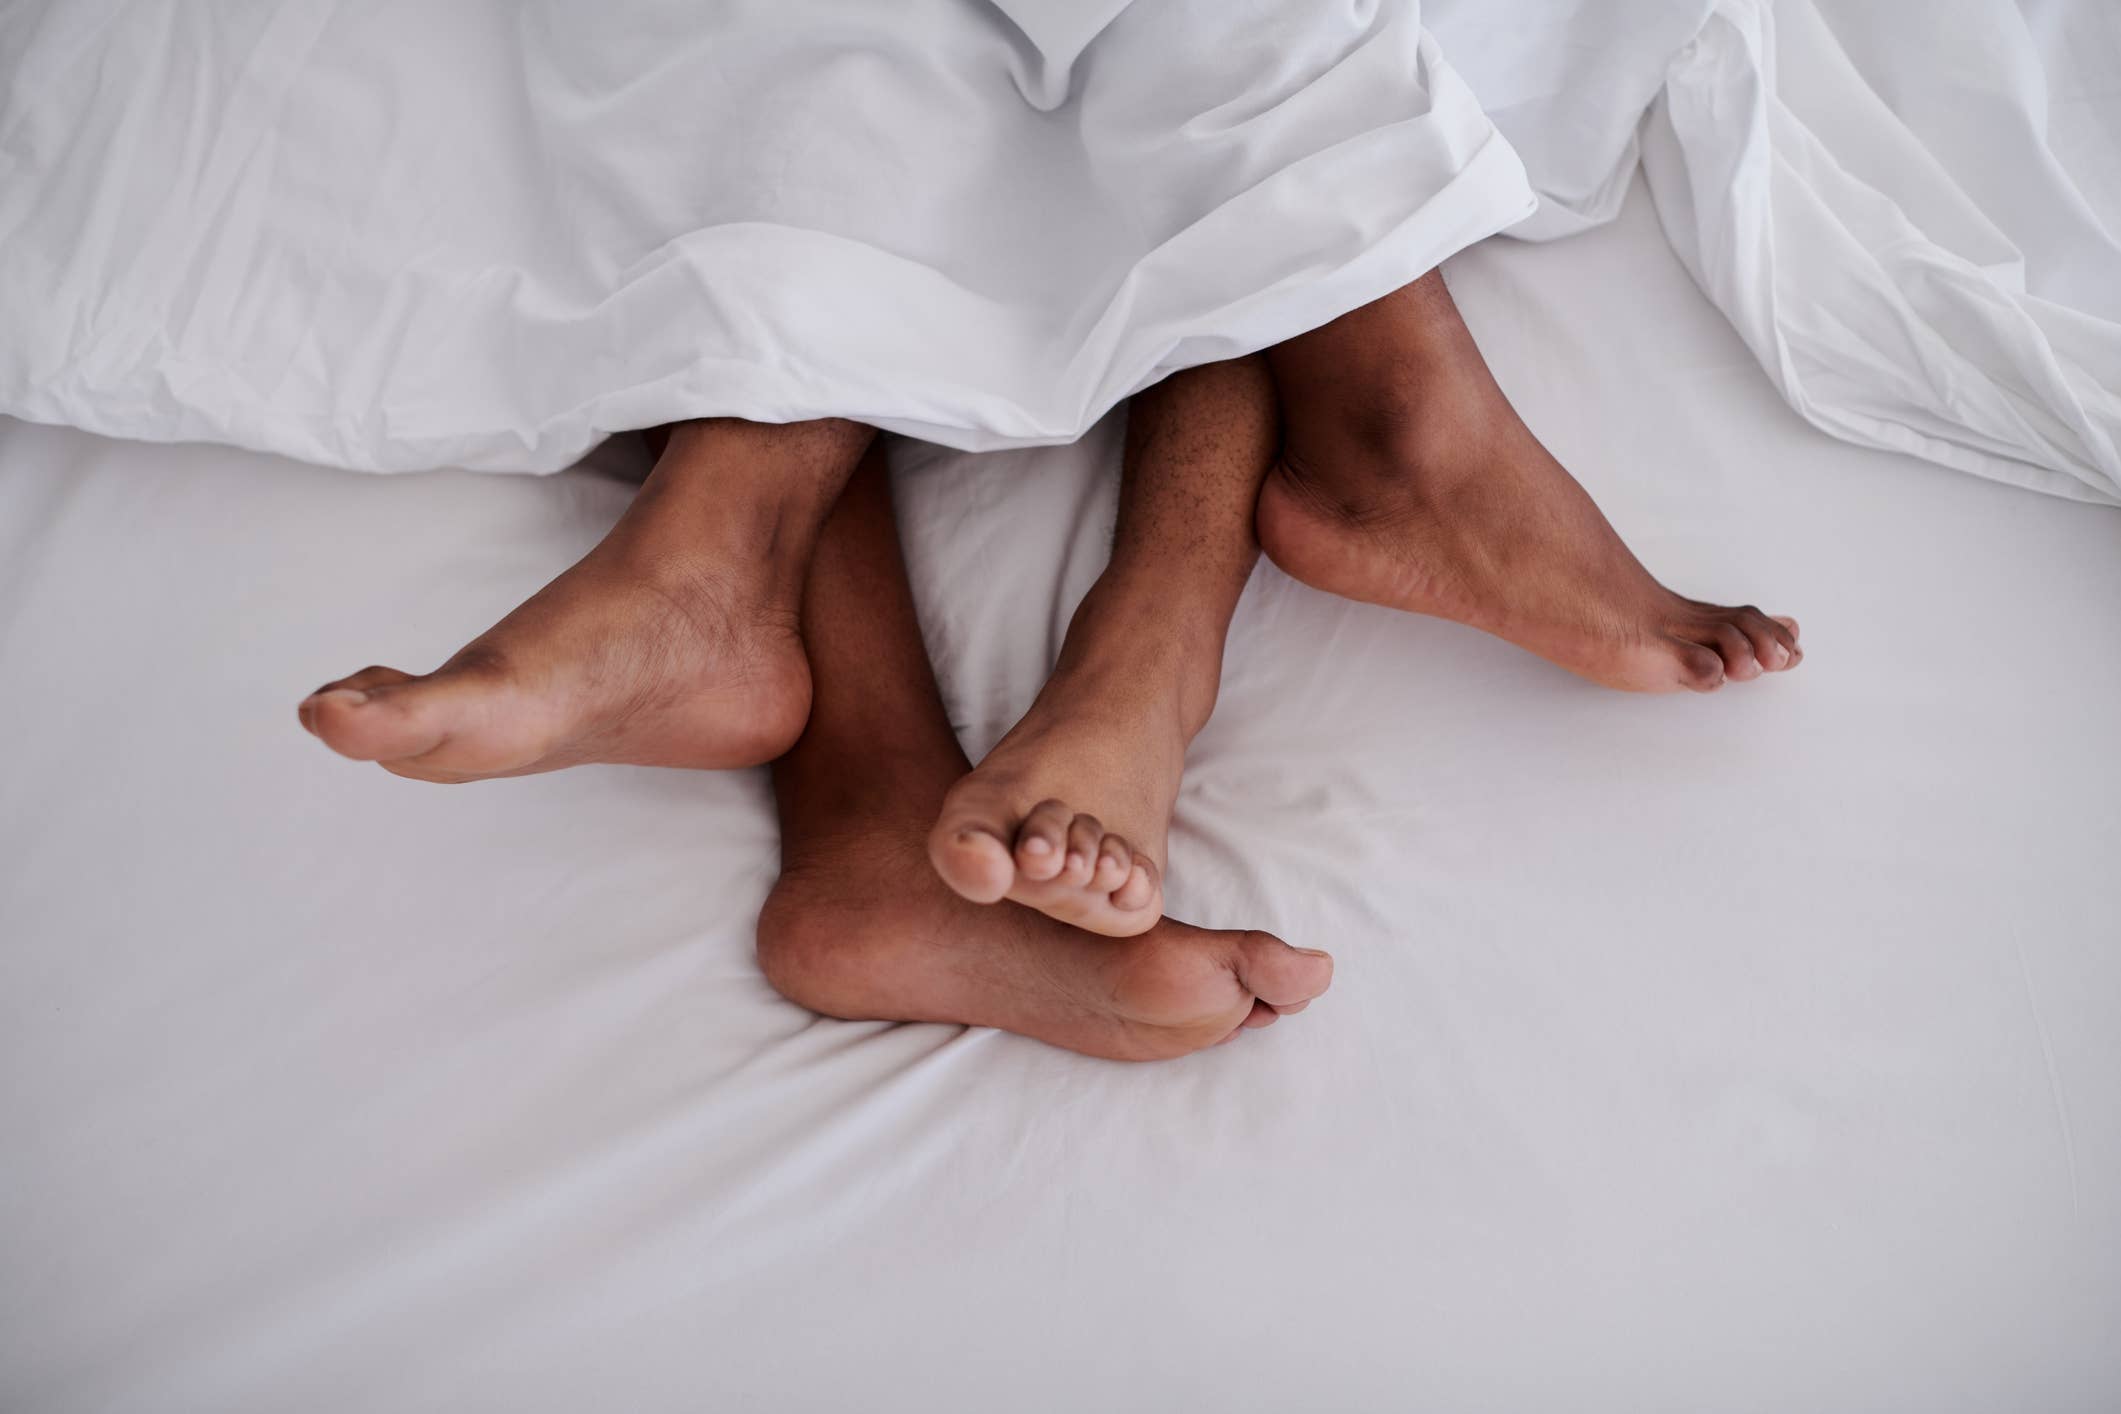 Two pairs of feet intertwined under white bedding, implying intimacy